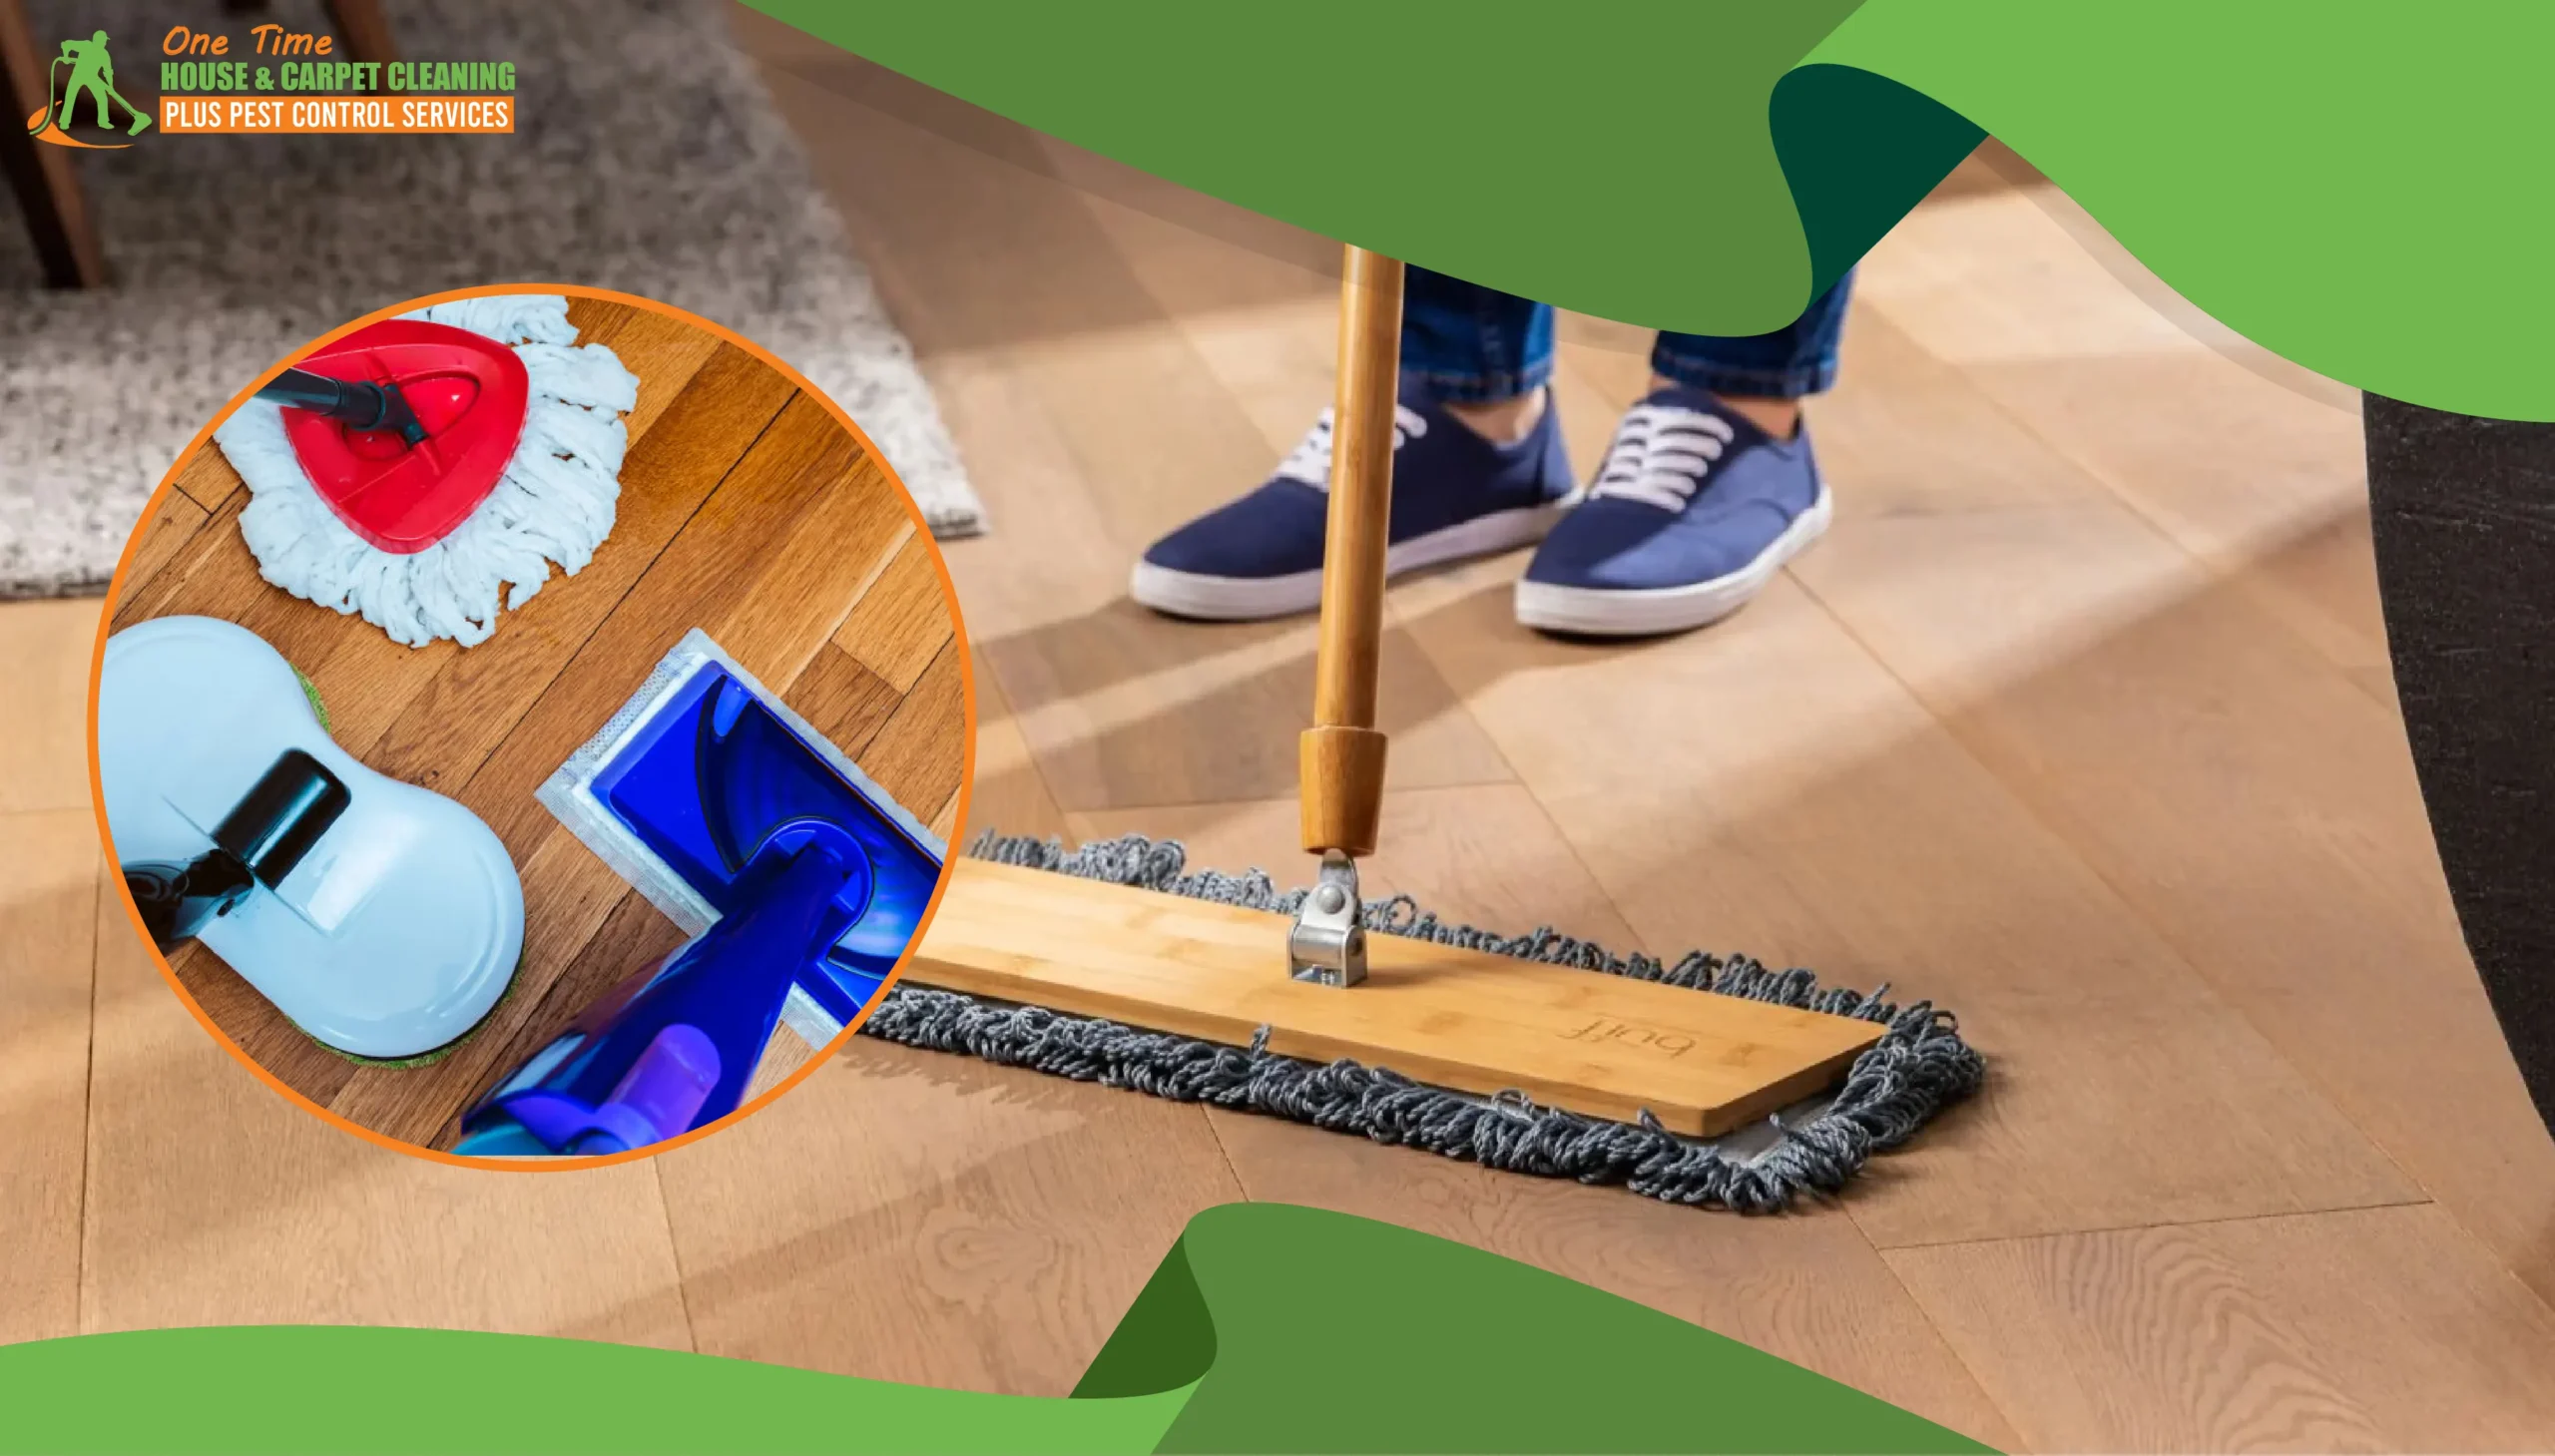 three-different-types-of-dust-mops-in-circle-and-person-cleaning-with-bamboo-microfiber-wet-and-dry-mop-system